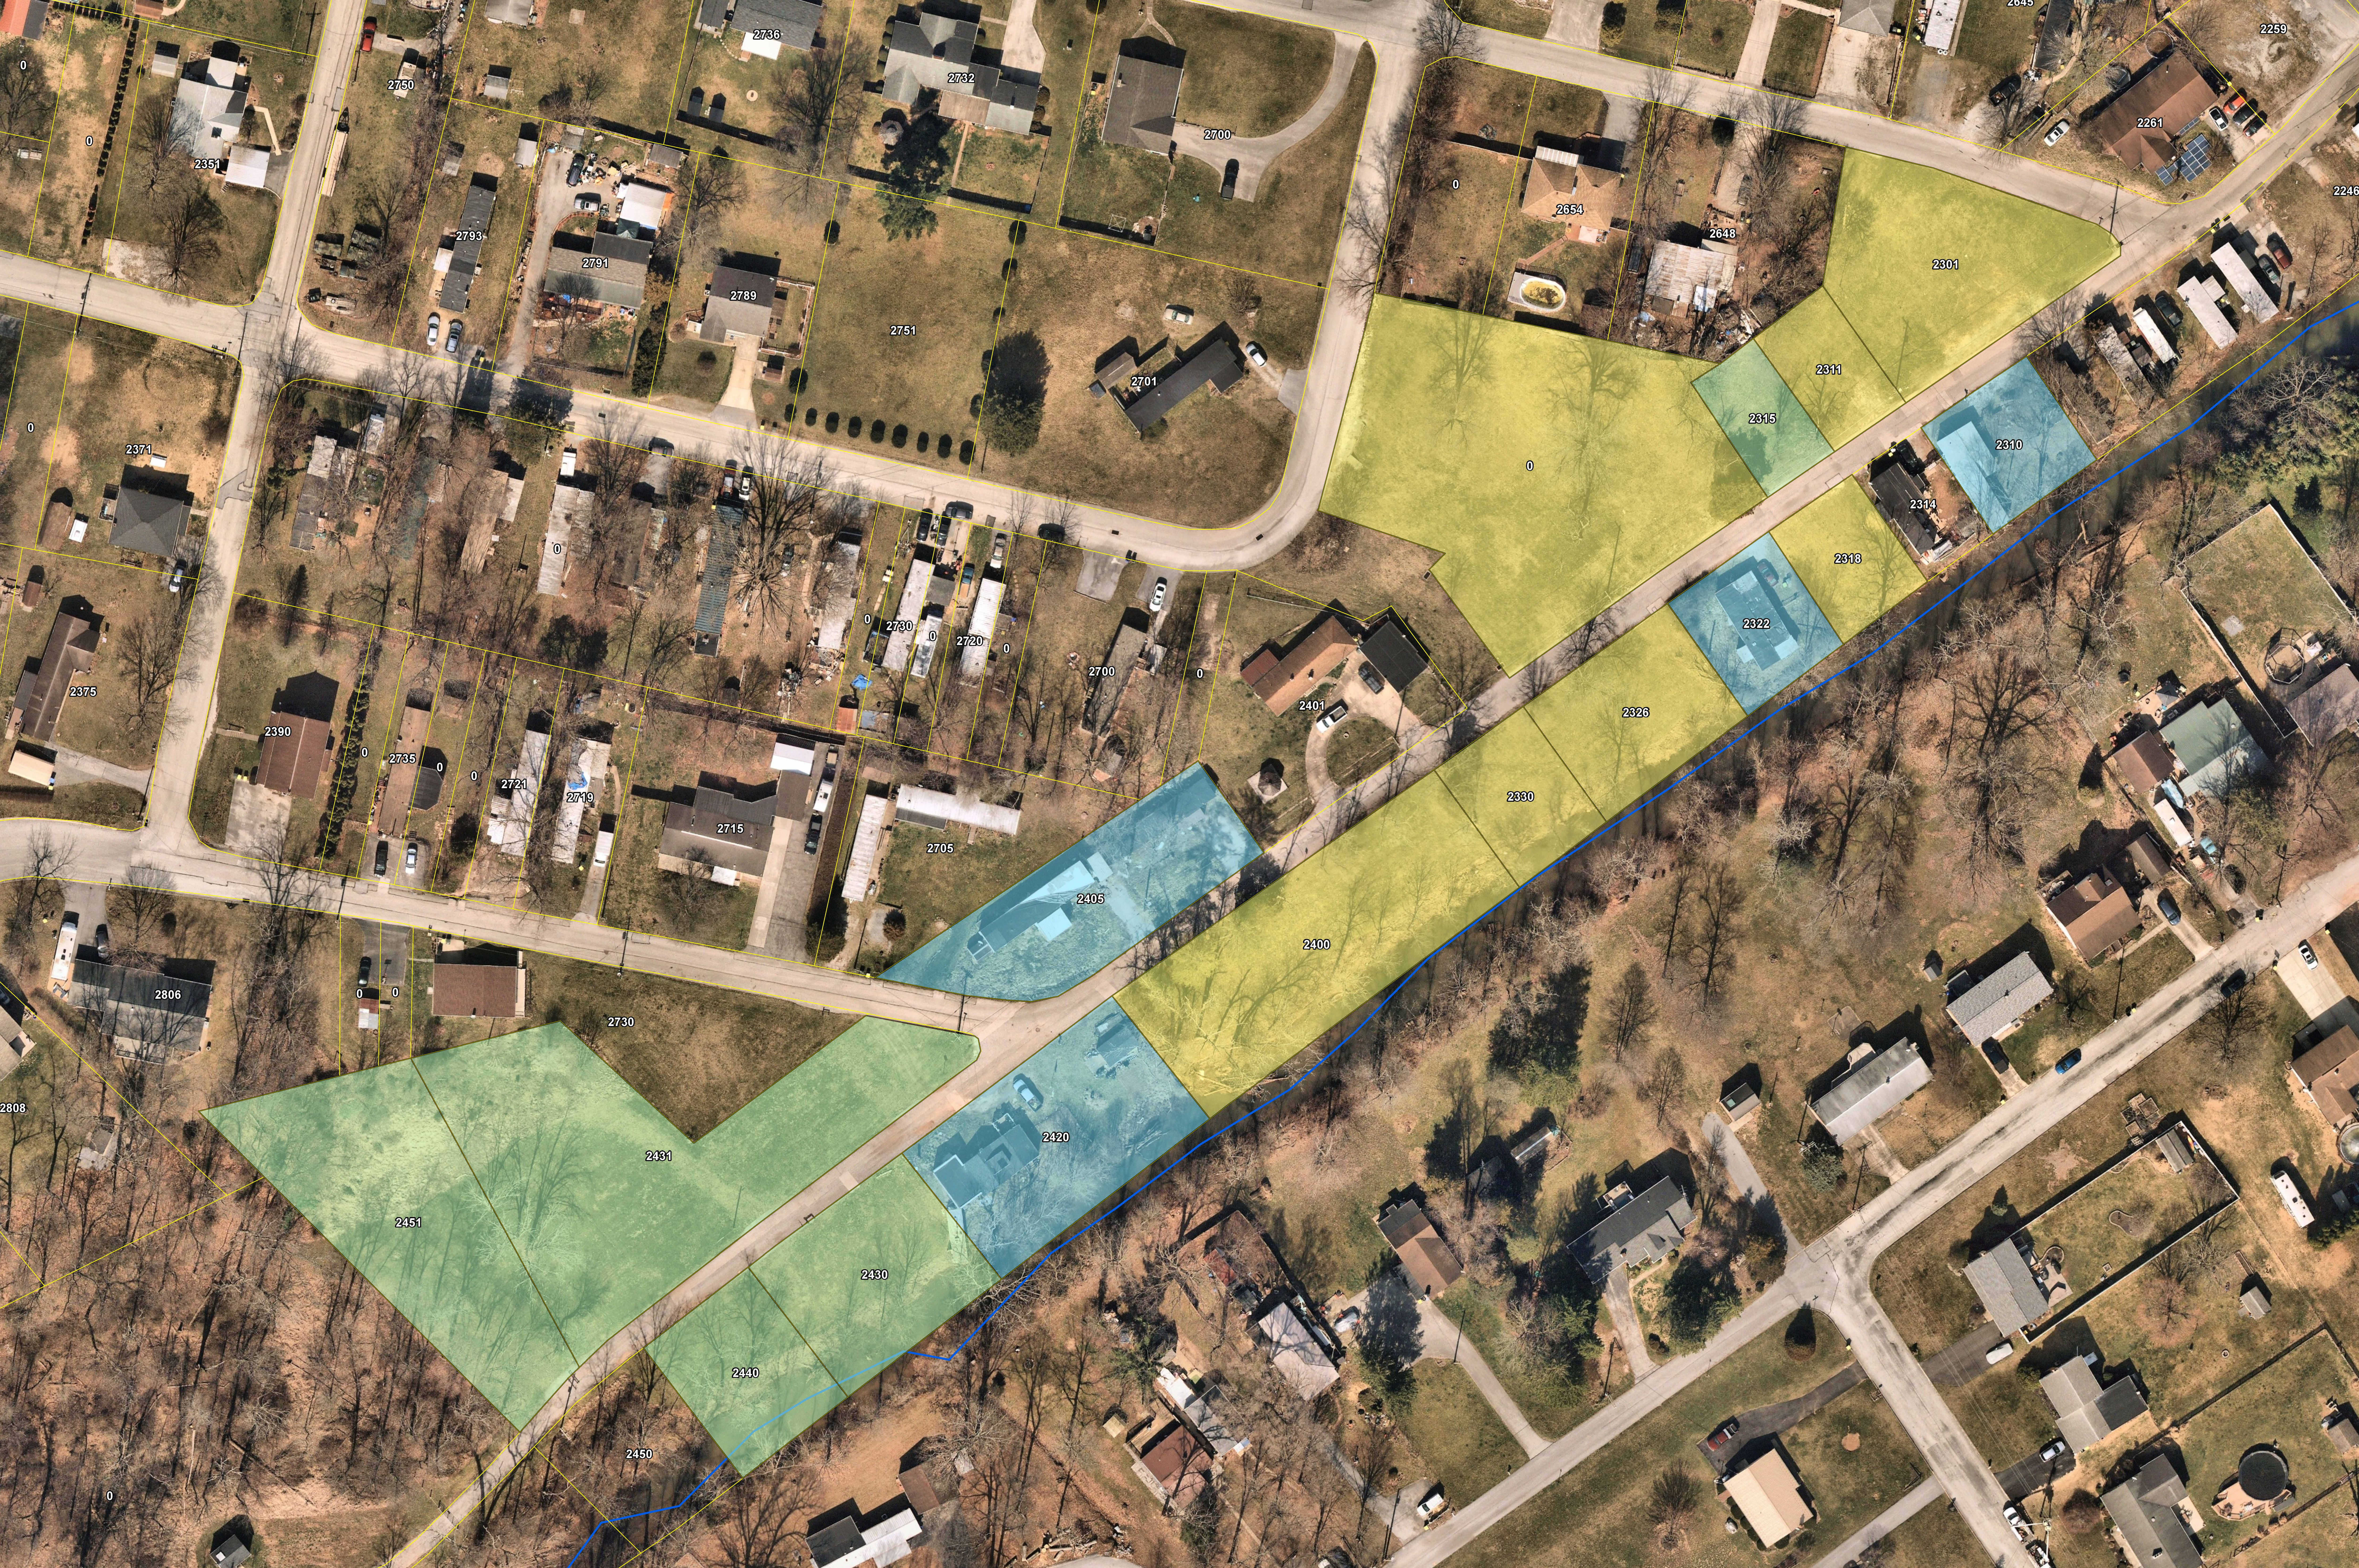 An aerial map showing the three rounds of property acquisitions for the HMGP grant. Round 1 are green properties. Round 2 are yellow properties. Round 3 are blue properties.